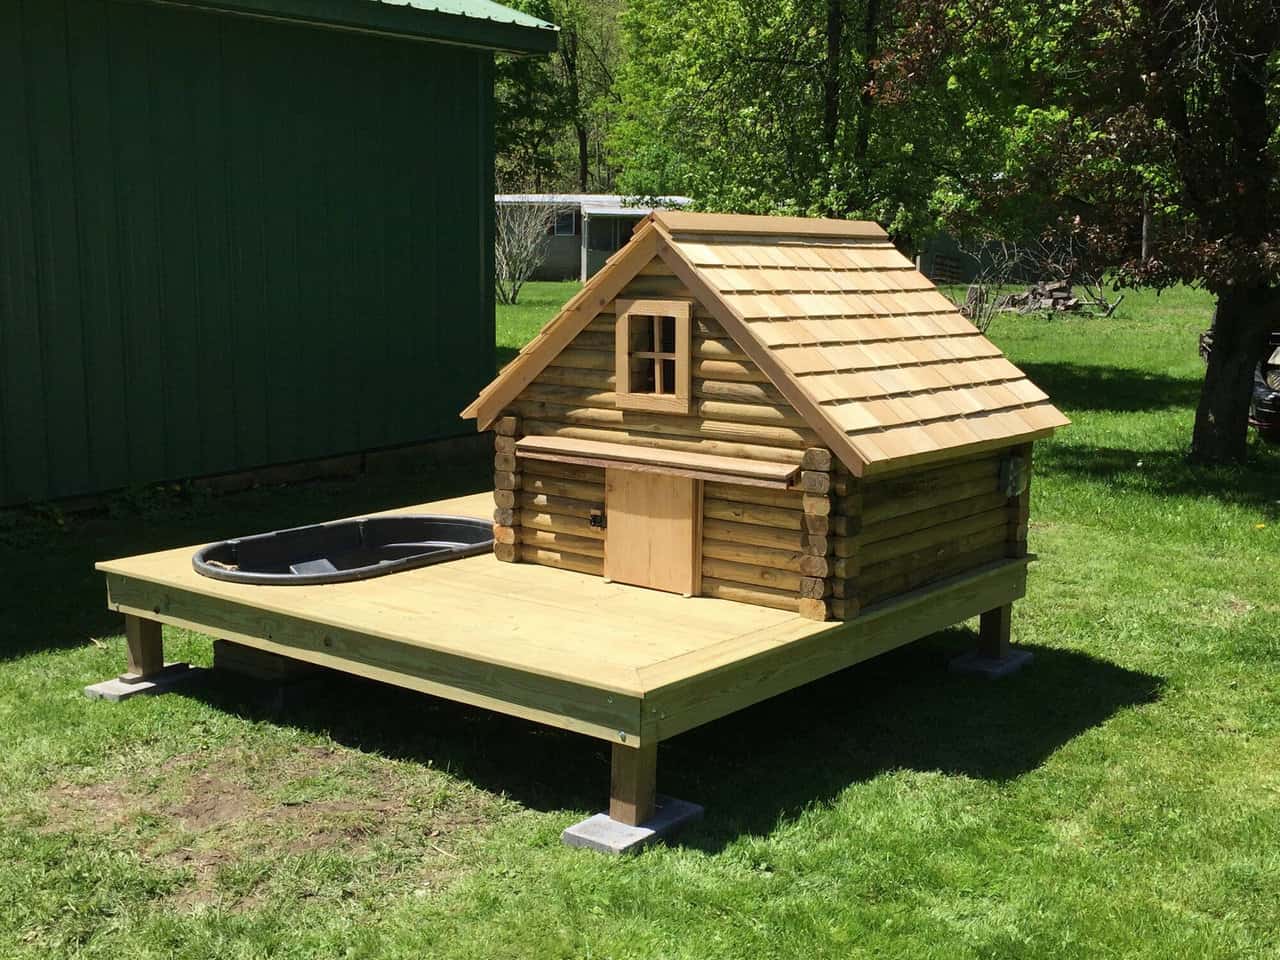 Duck Coops: 15 Tips To Design The Perfect Coop For Your Ducks